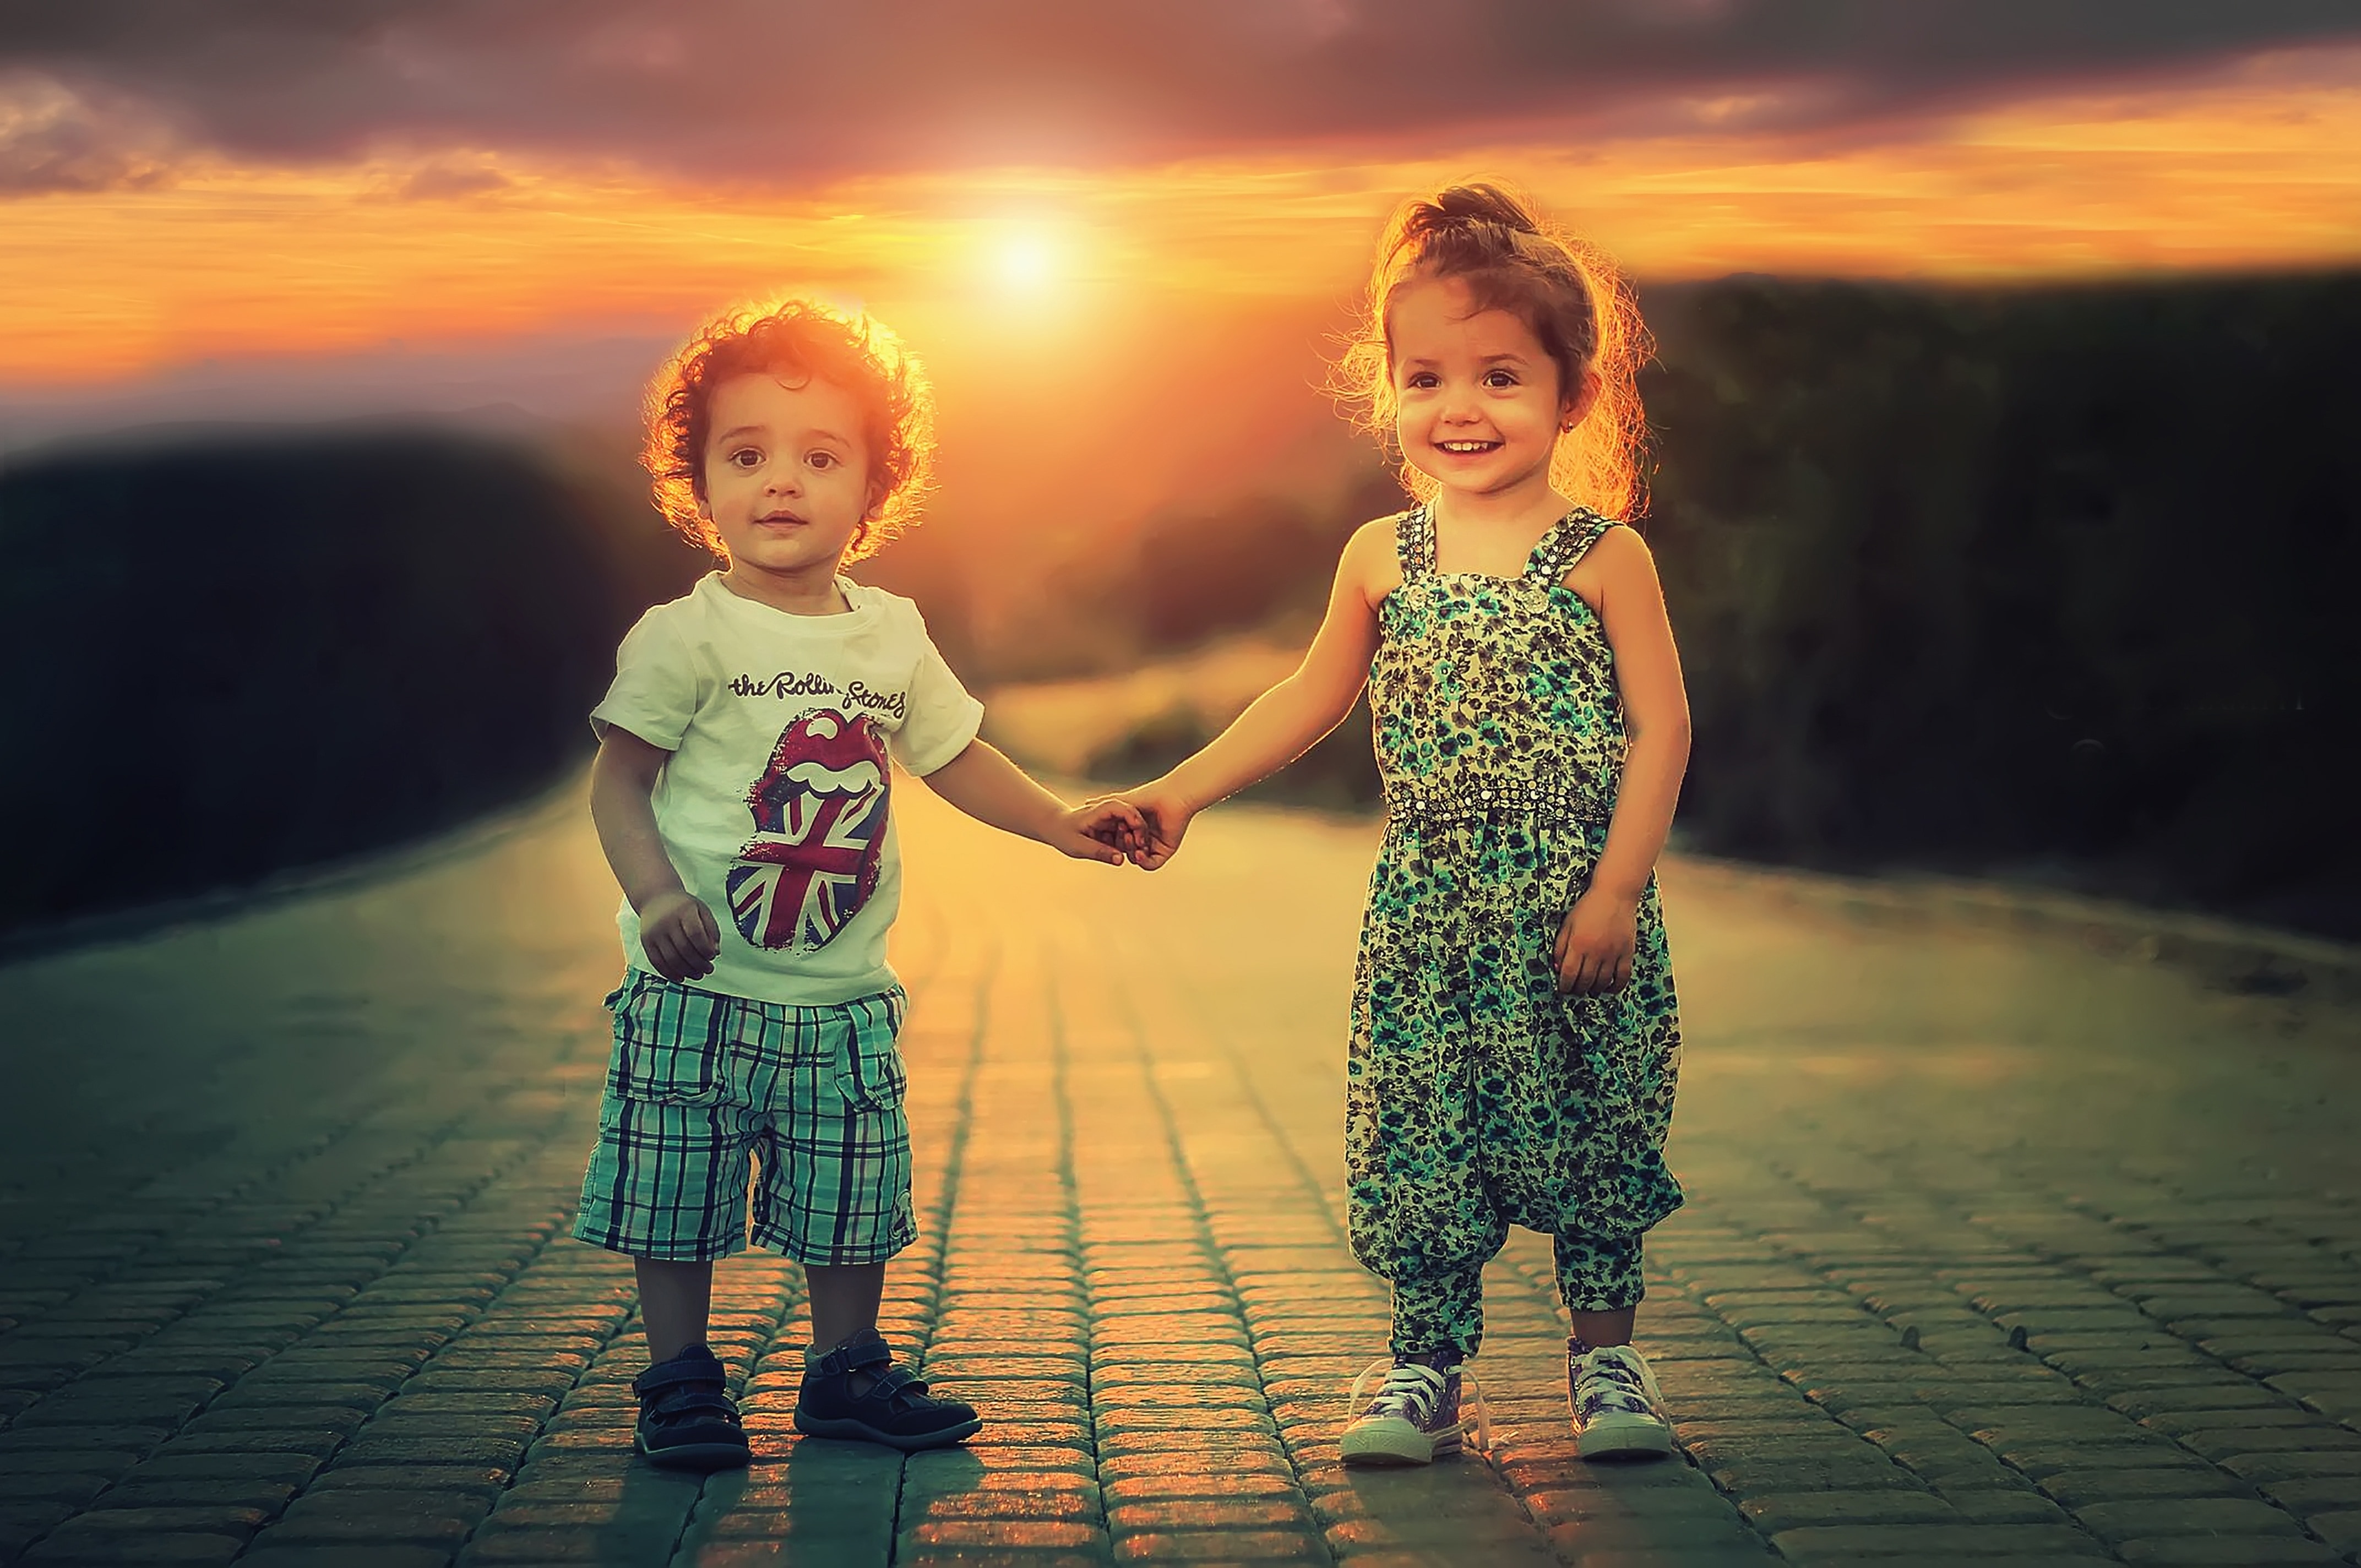 boy and girl holding hands on the road under sunset